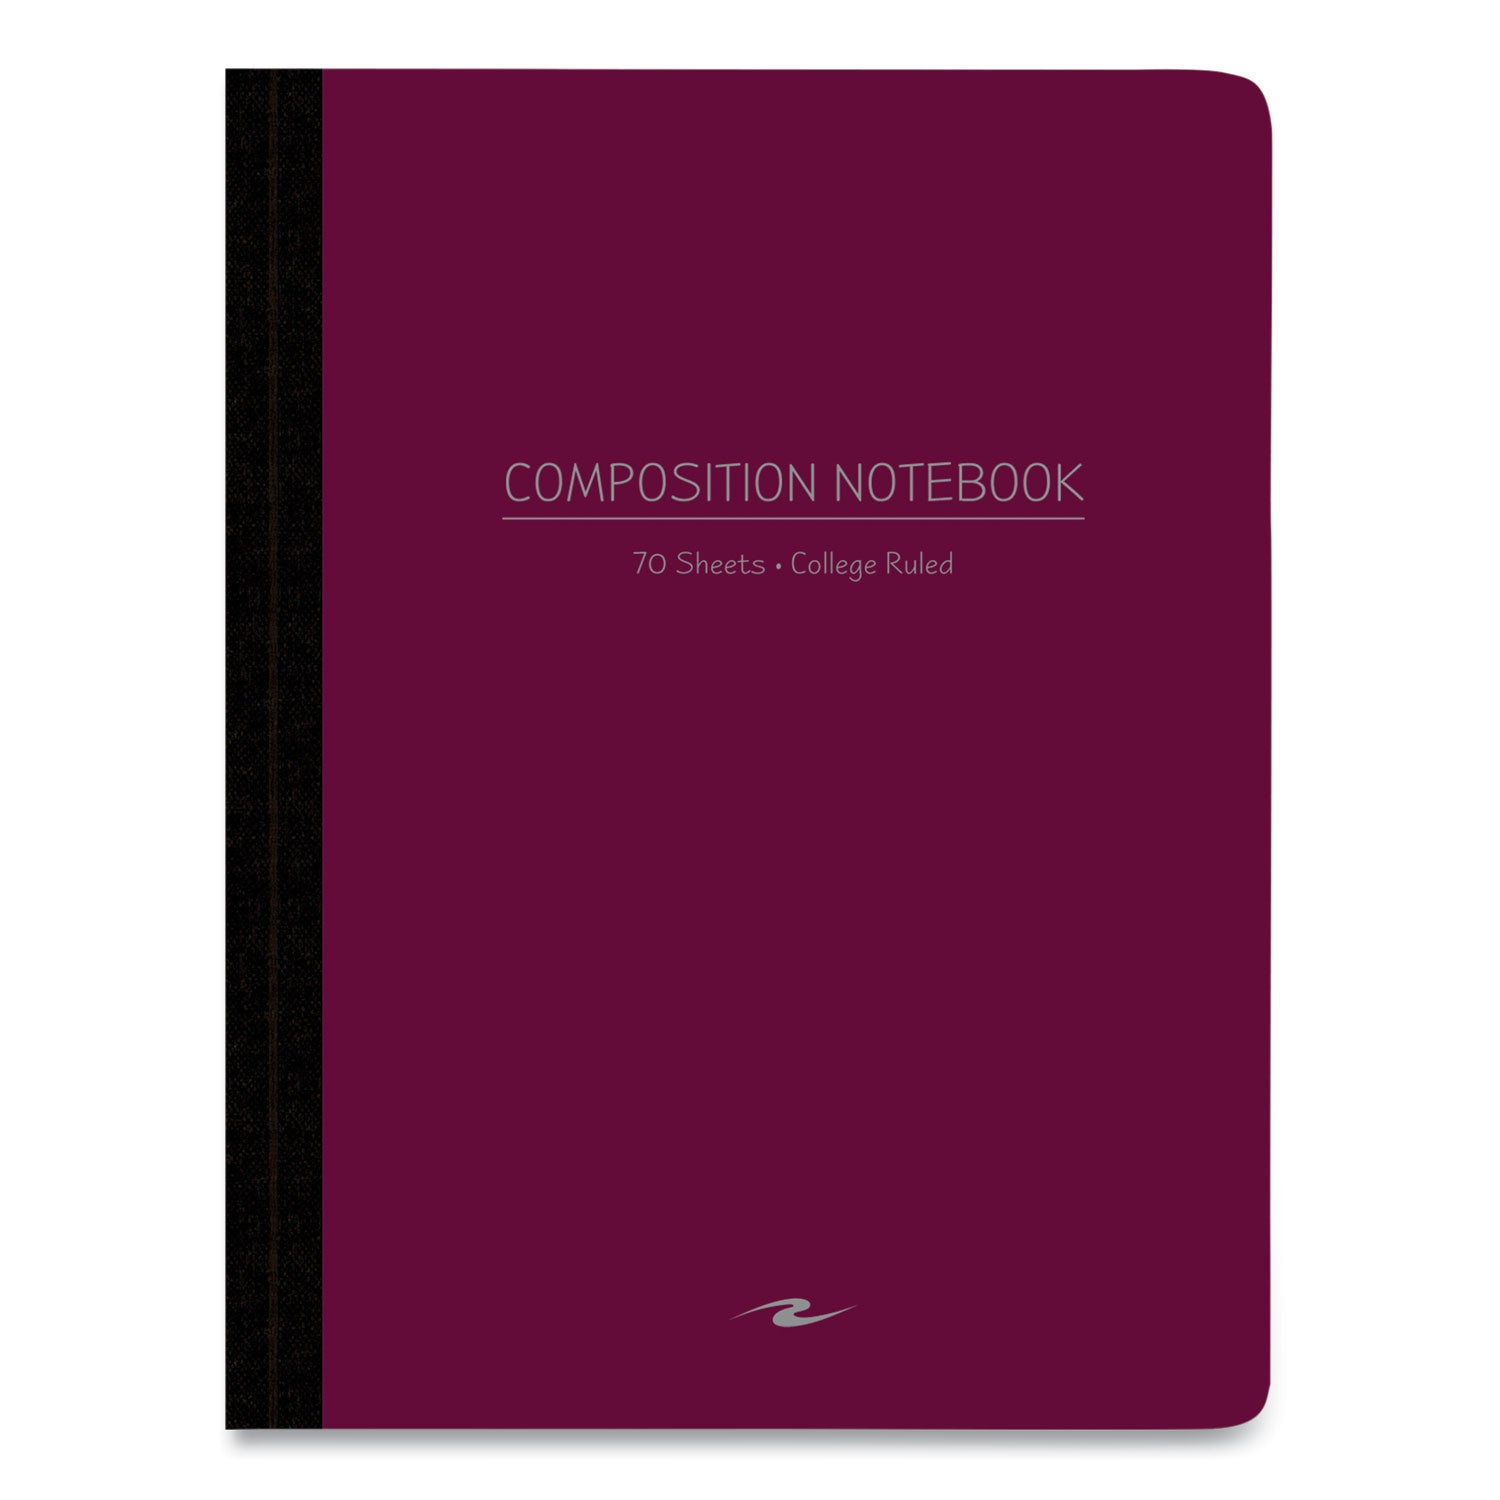 poly-flex-composition-notebook-med-college-rule-asst-cover-70-975-x-75-sheet-24-ct-ships-in-4-6-business-days_roa77293cs - 5